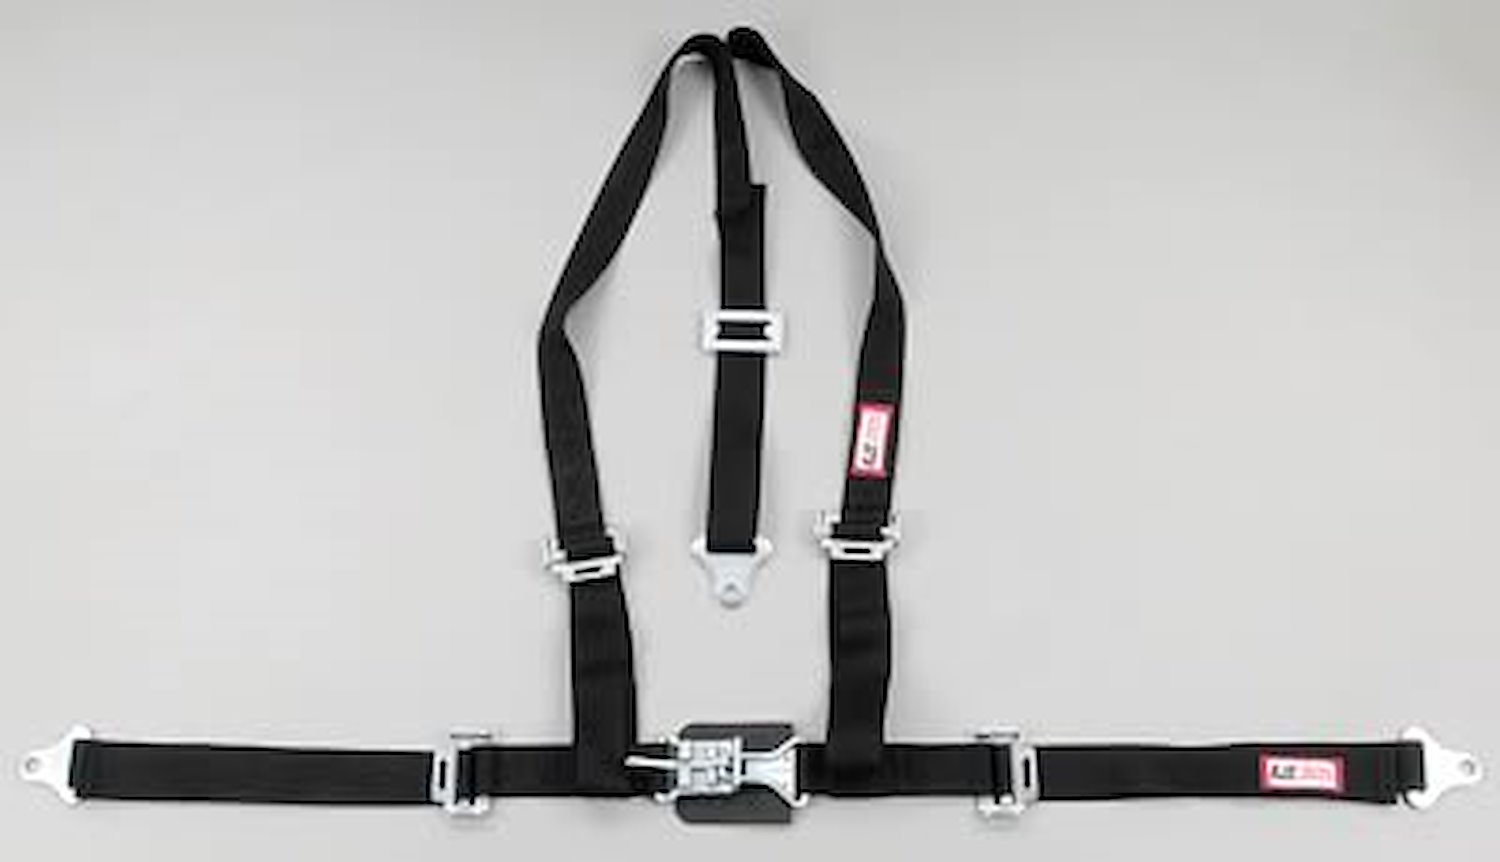 NON-SFI L&L HARNESS 2 PULL UP Lap Belt SNAP SEWN IN 2 S.H. Y FLOOR Mount WRAP/SNAP KHAKI